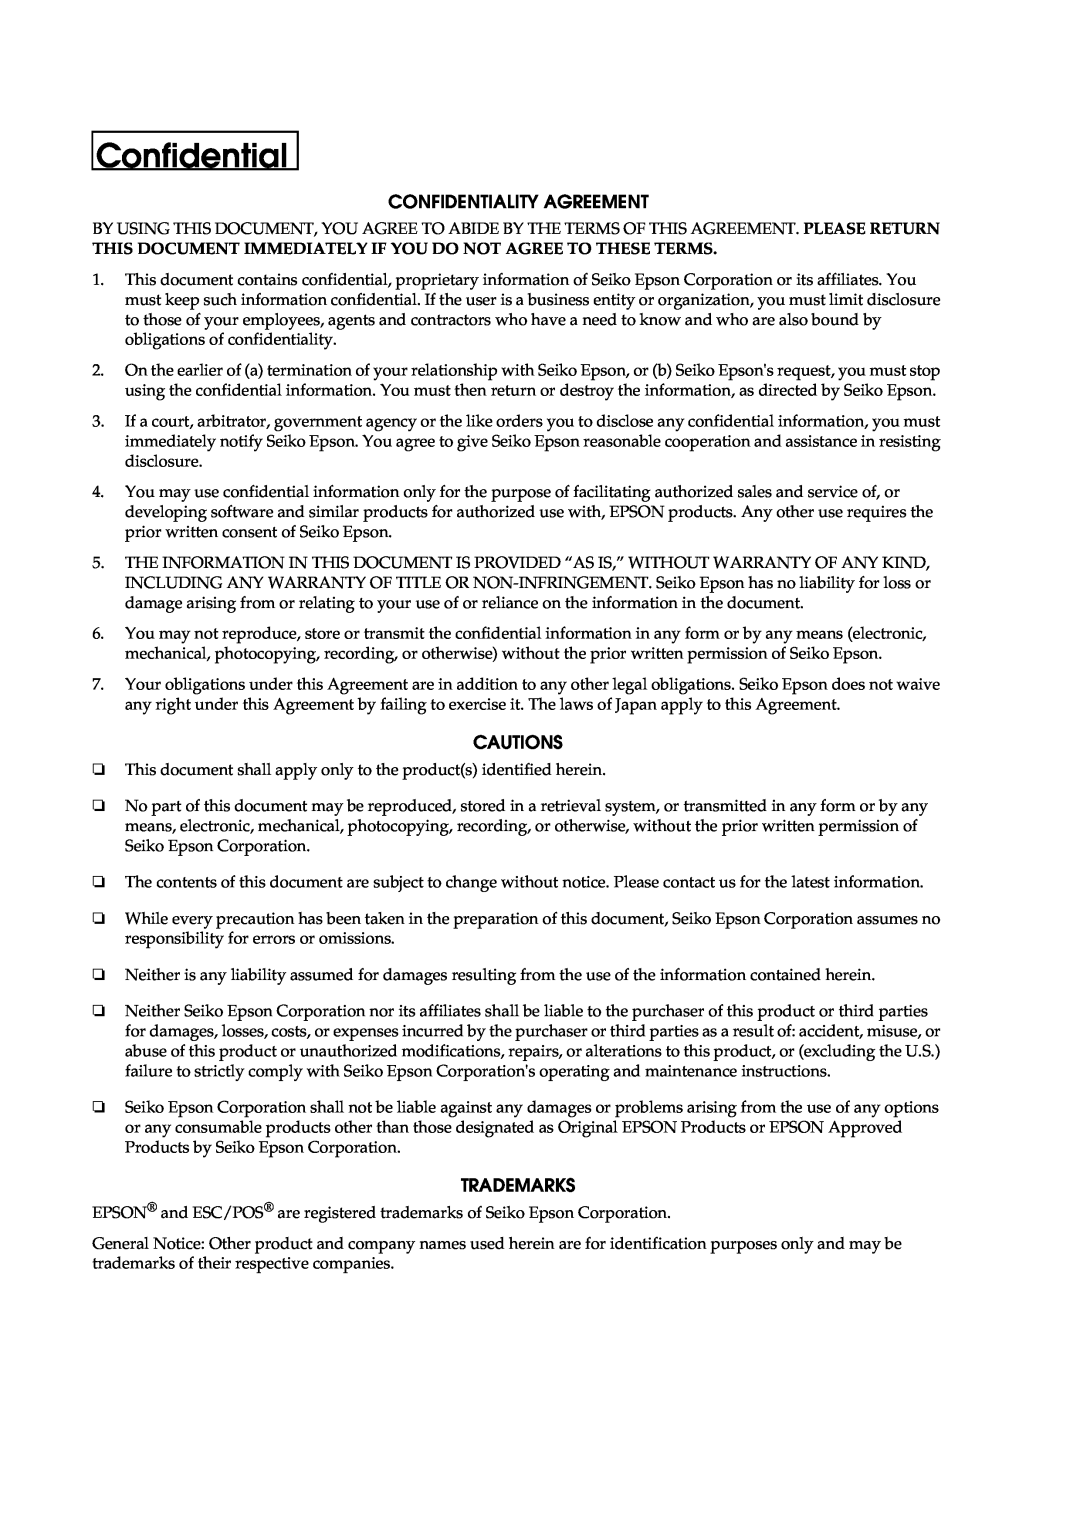 Epson U230 manual Confidentiality Agreement, Cautions, Trademarks 